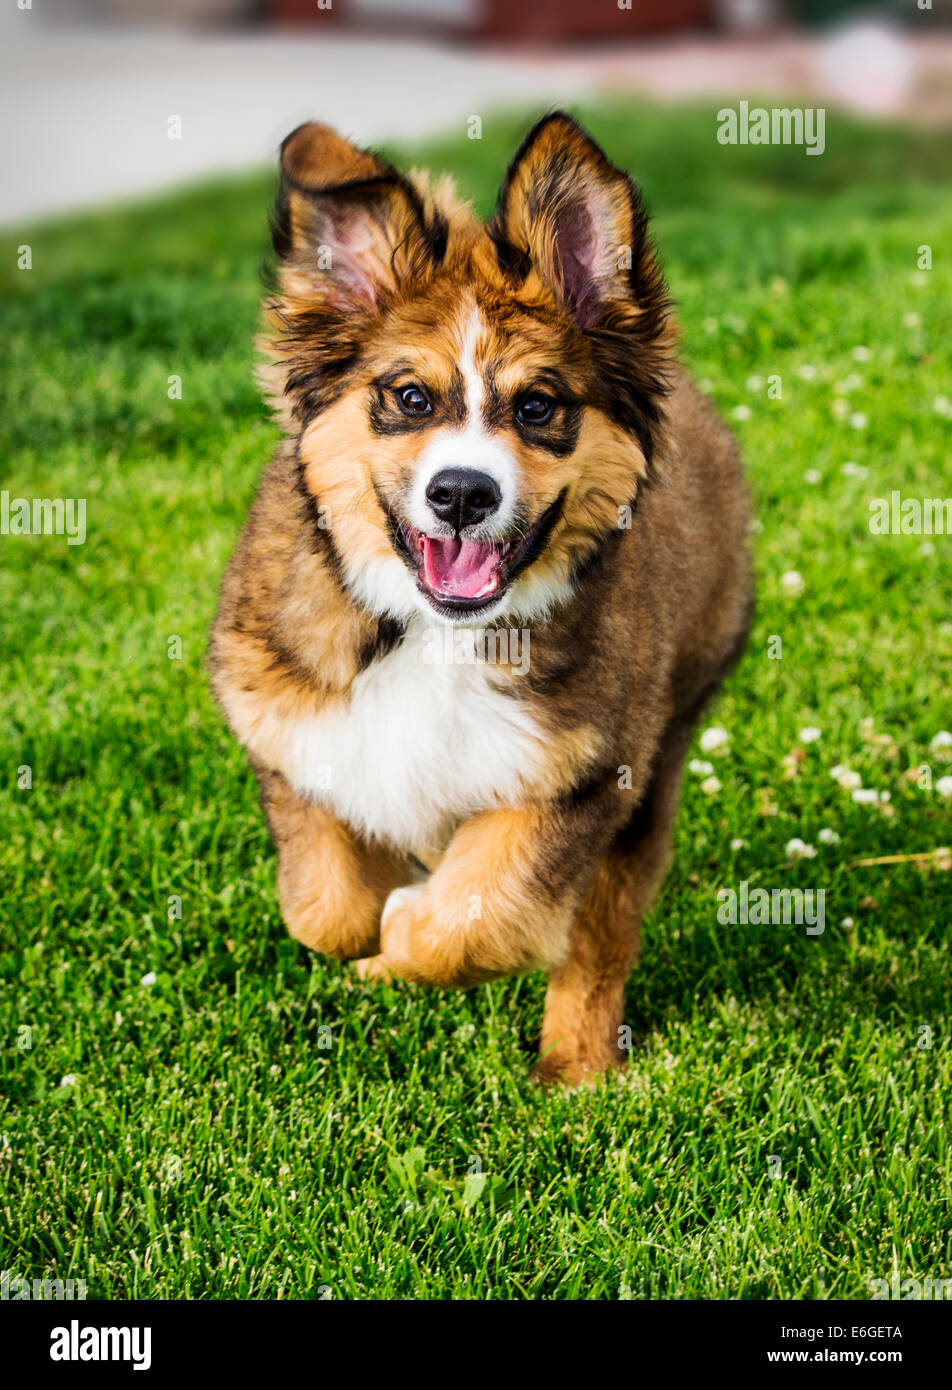 Twelve week old Bernese Mountain Dog, Great Pyrenees, mix breed, puppy  running on grass Stock Photo - Alamy